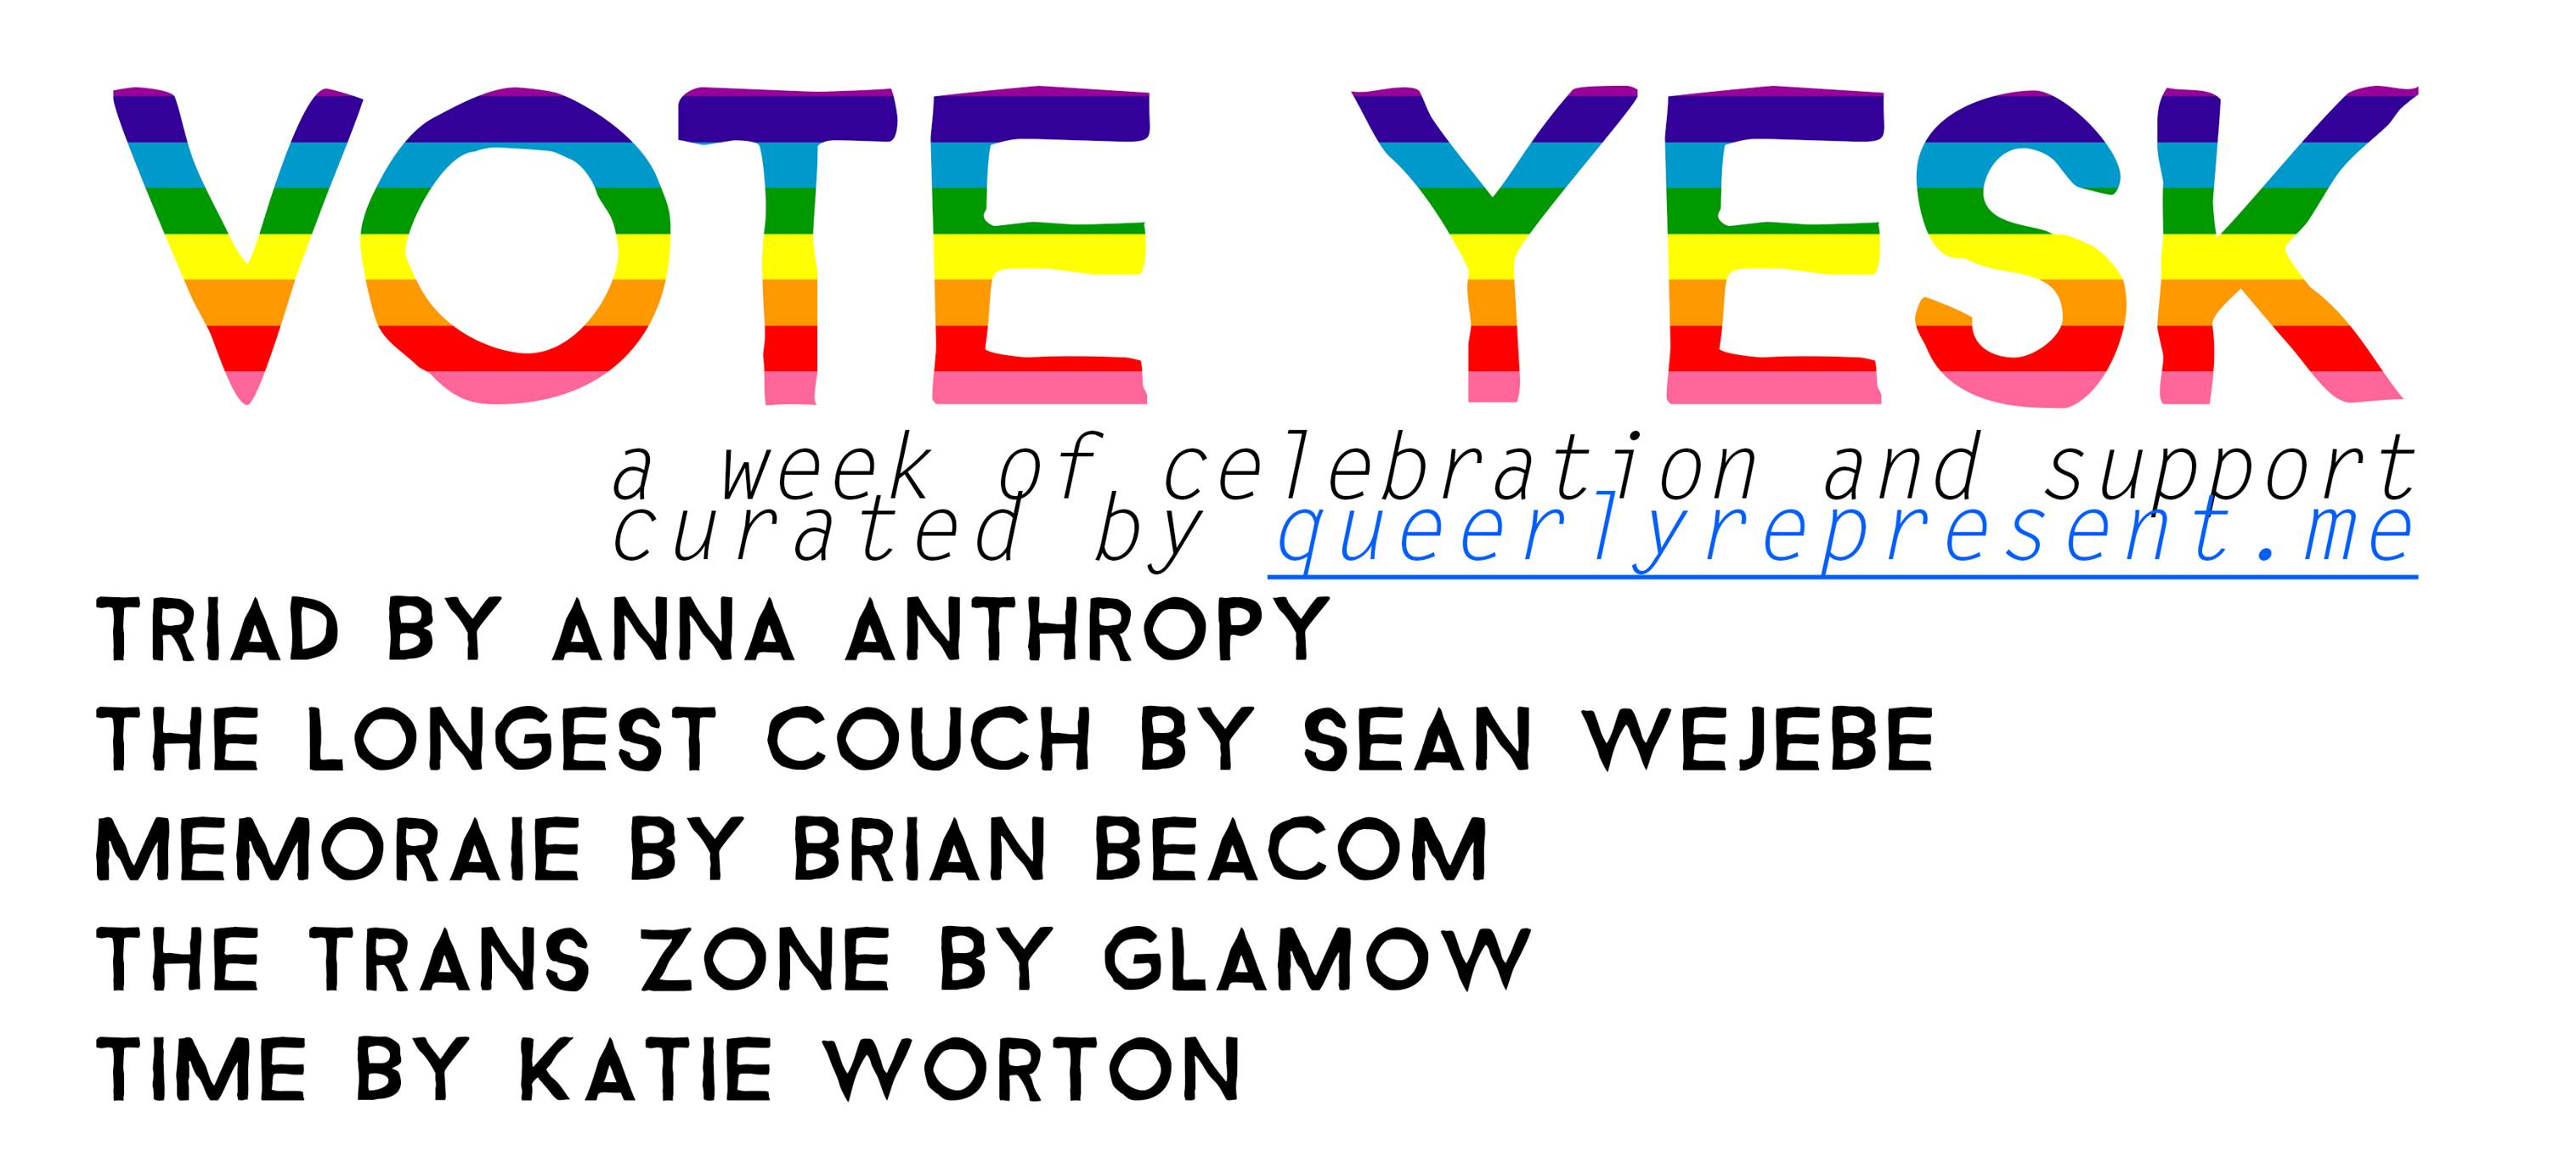 Vote Yes K logo. Text reading 'A week of celebration and support curated by Queerly Represent Me. Triad by Anna Anthropy. The Longest Couch by Sean Wejebe. Memoraie by Brian Beacom. The Trans Zone by Glamow. Time by Katie Worton.'